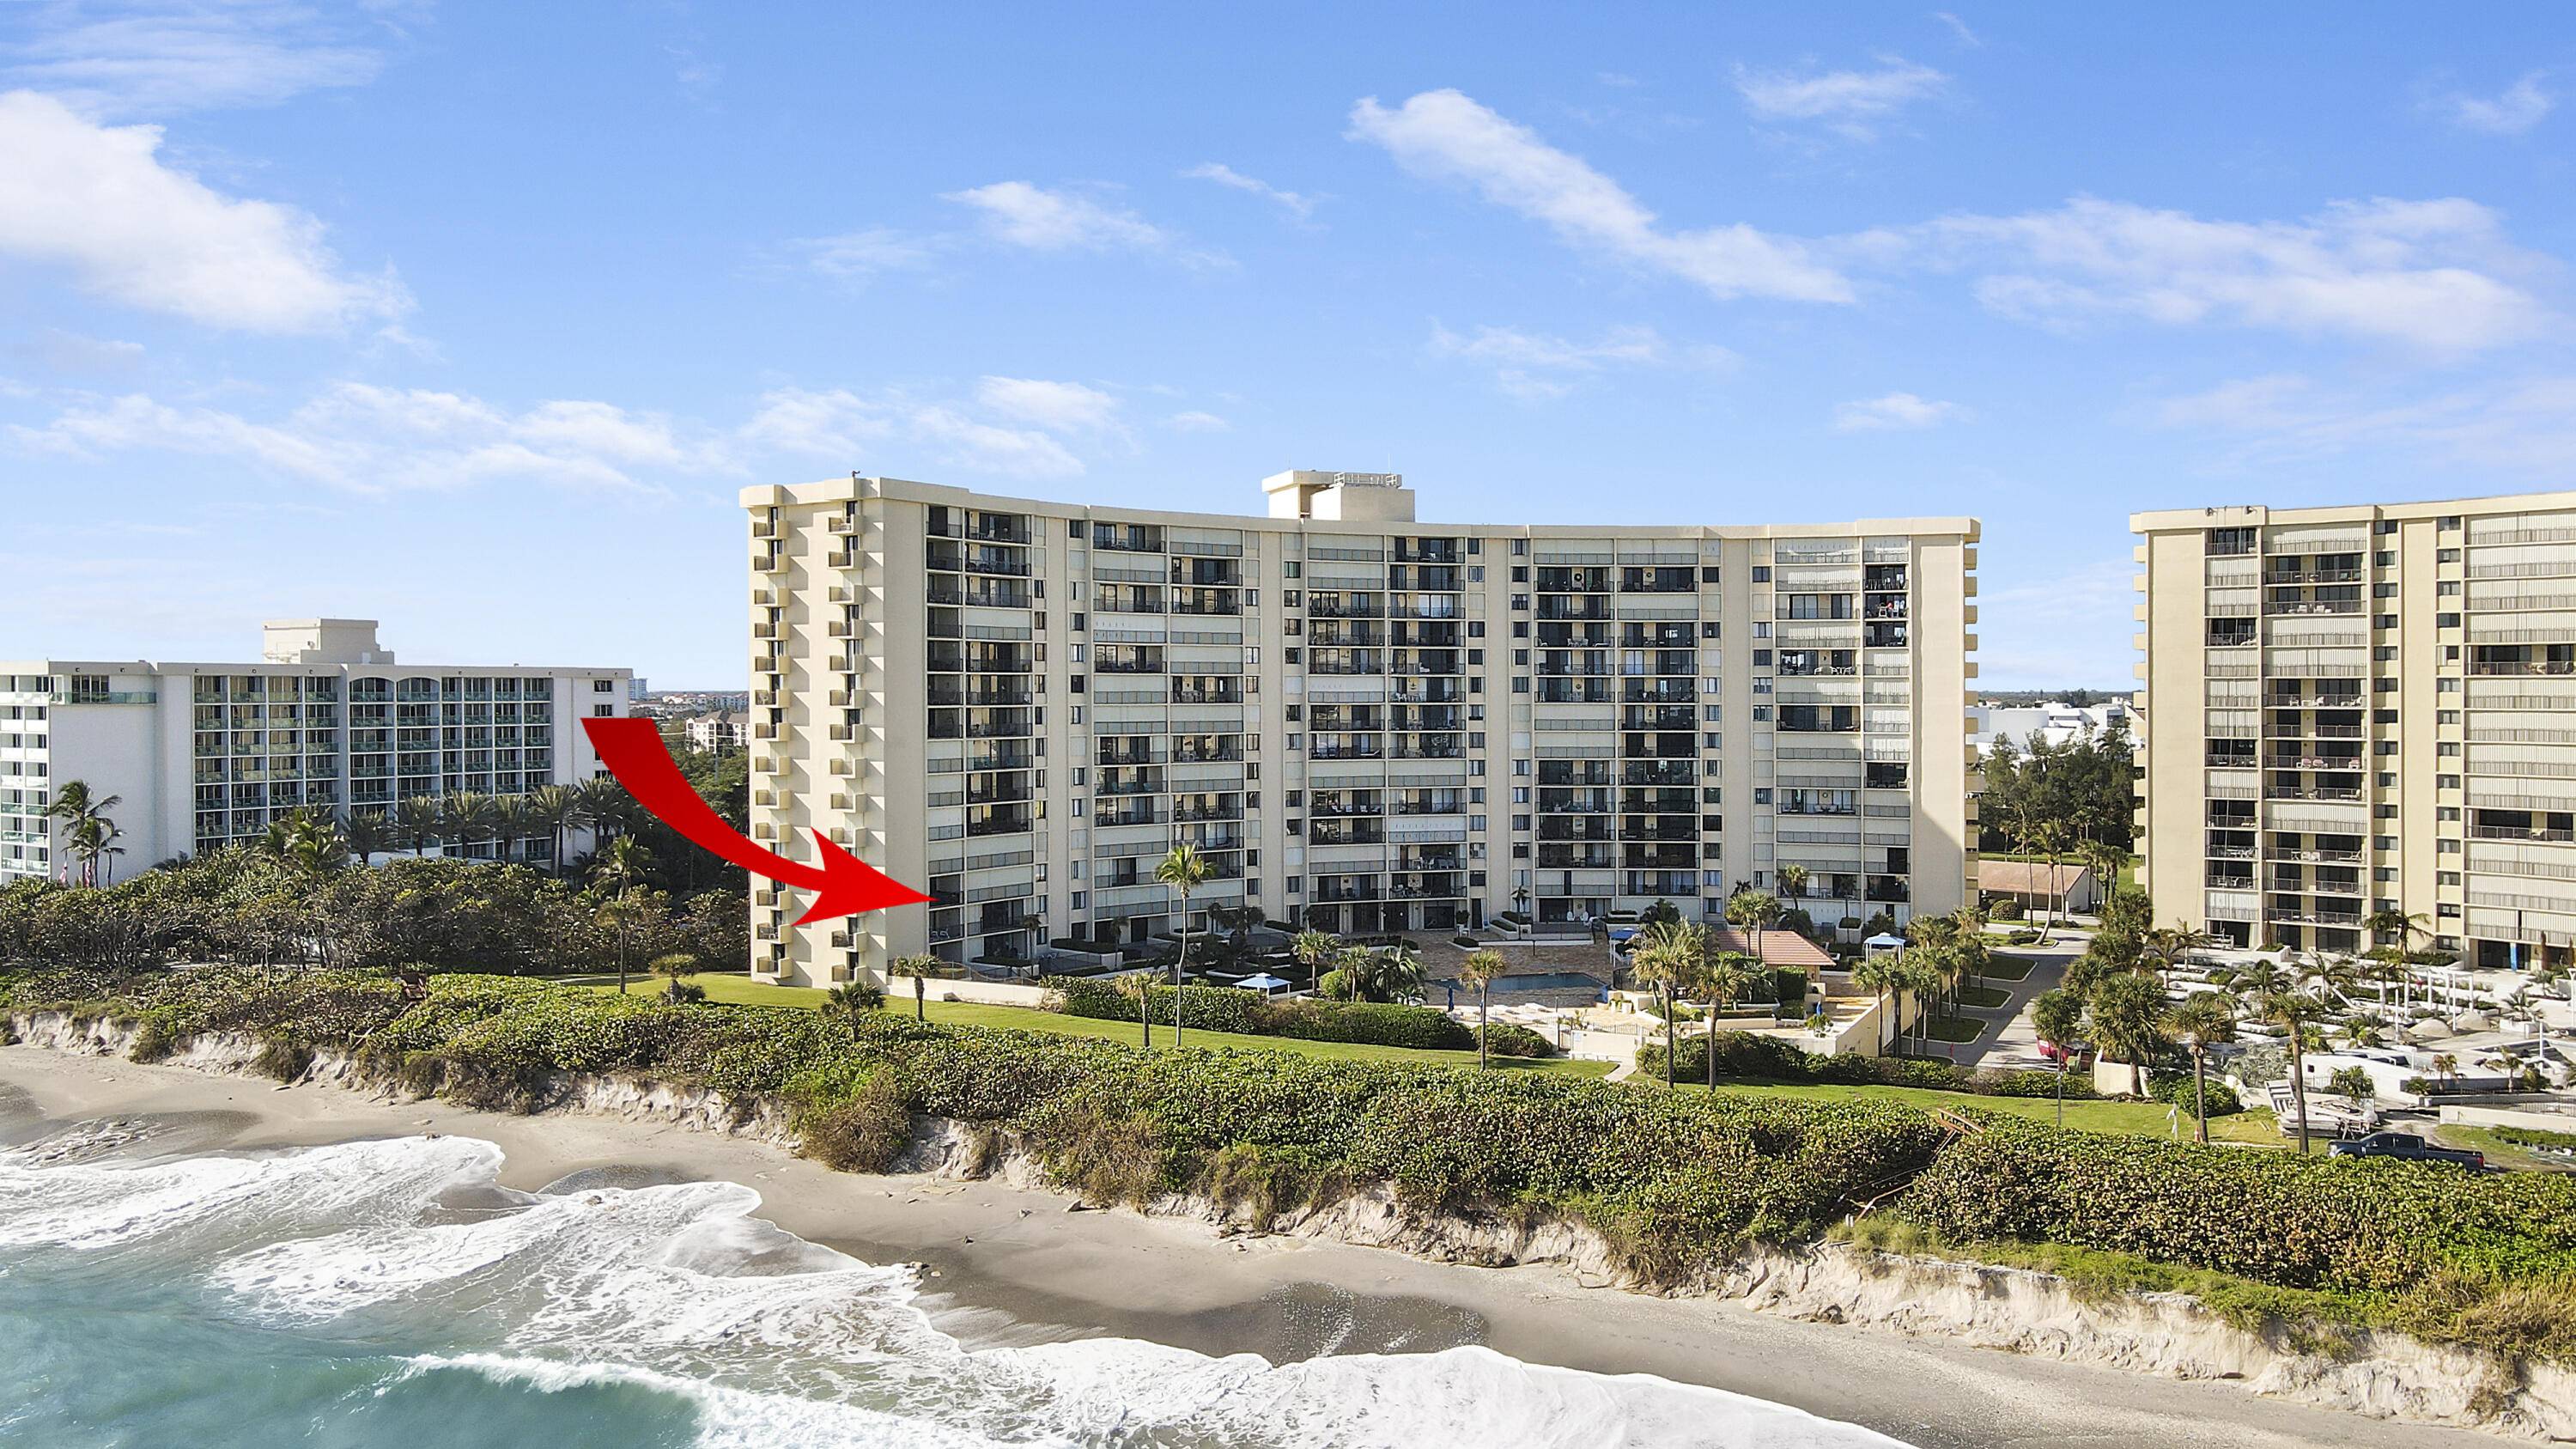 AMAZING LOCATION ! 3rd floor end unit, direct beachfront, just south of the Jupiter Inlet, next door to the fabulous Jupiter Beach Resort.